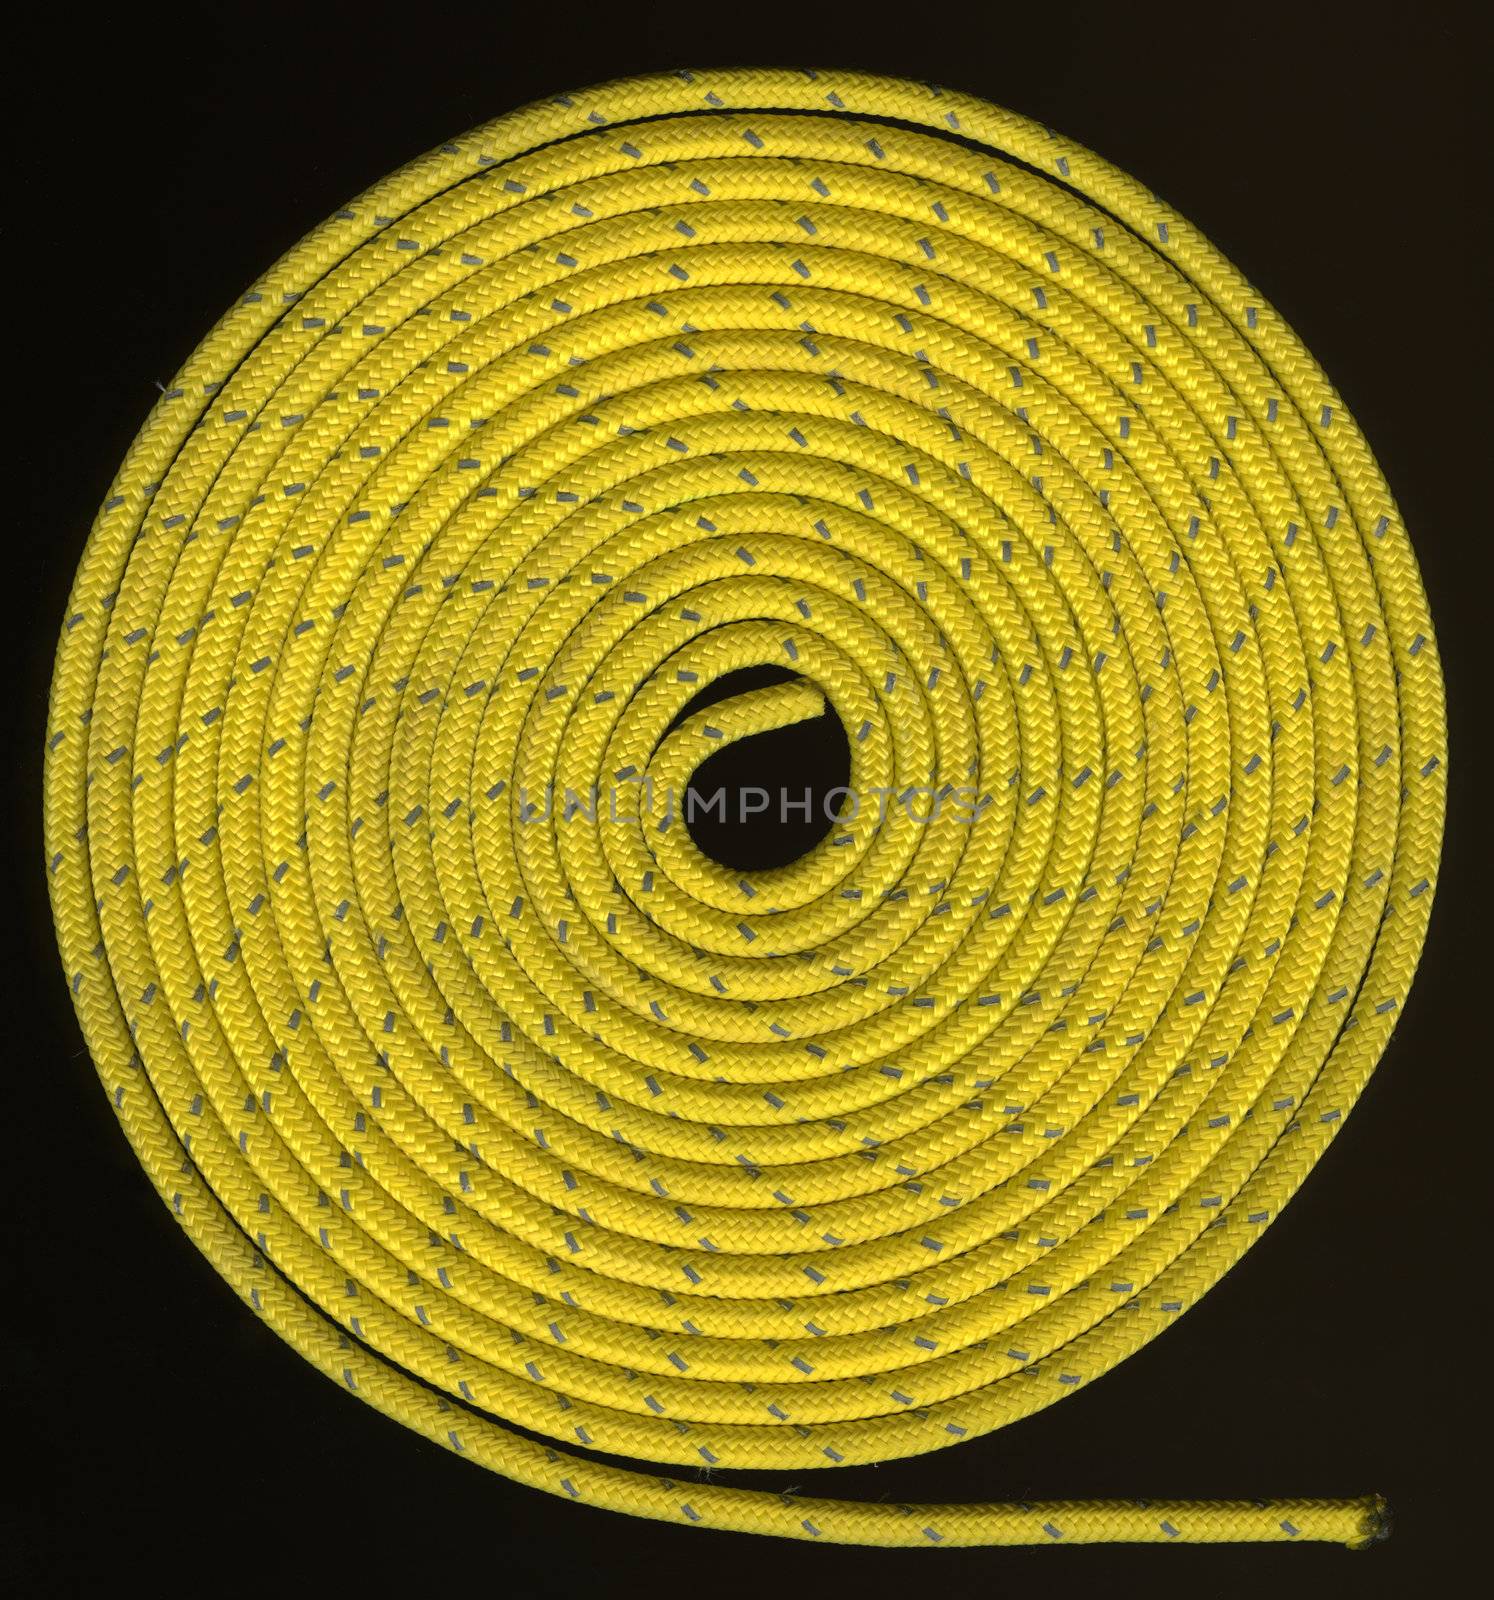 tight coils of yellow, nylon rope with a silver reflective thread on black